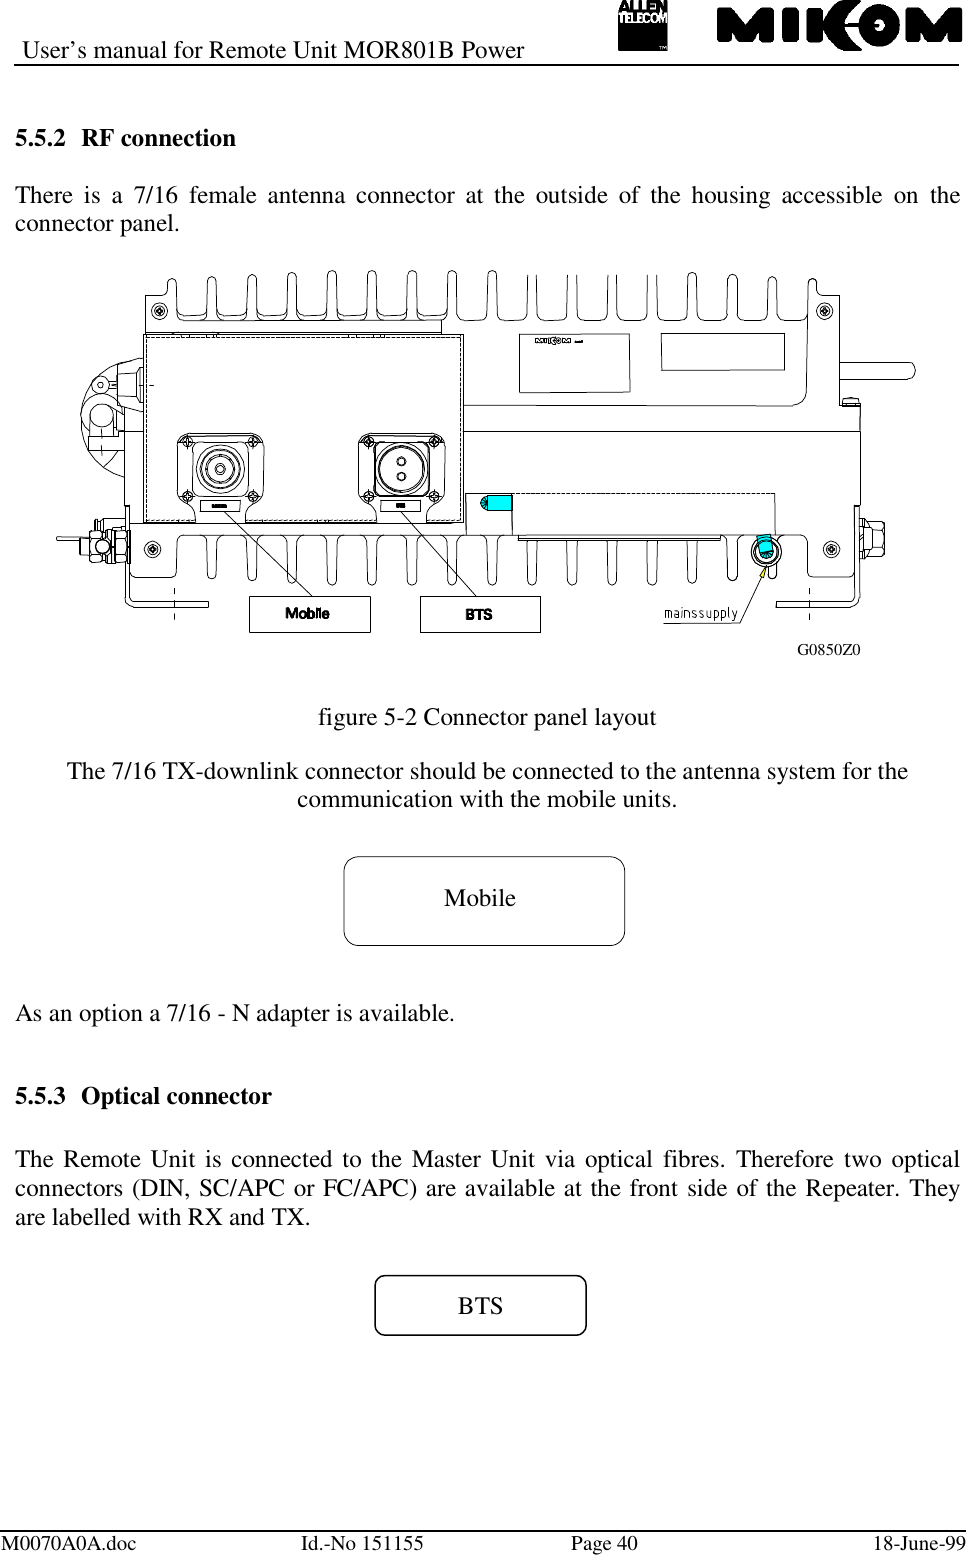 User’s manual for Remote Unit MOR801B PowerM0070A0A.doc Id.-No 151155 Page 40 18-June-995.5.2 RF connectionThere is a 7/16 female antenna connector at the outside of the housing accessible on theconnector panel.figure 5-2 Connector panel layoutThe 7/16 TX-downlink connector should be connected to the antenna system for thecommunication with the mobile units.MobileAs an option a 7/16 - N adapter is available.5.5.3 Optical connectorThe Remote Unit is connected to the Master Unit via optical fibres. Therefore two opticalconnectors (DIN, SC/APC or FC/APC) are available at the front side of the Repeater. Theyare labelled with RX and TX.BTSG0850Z0